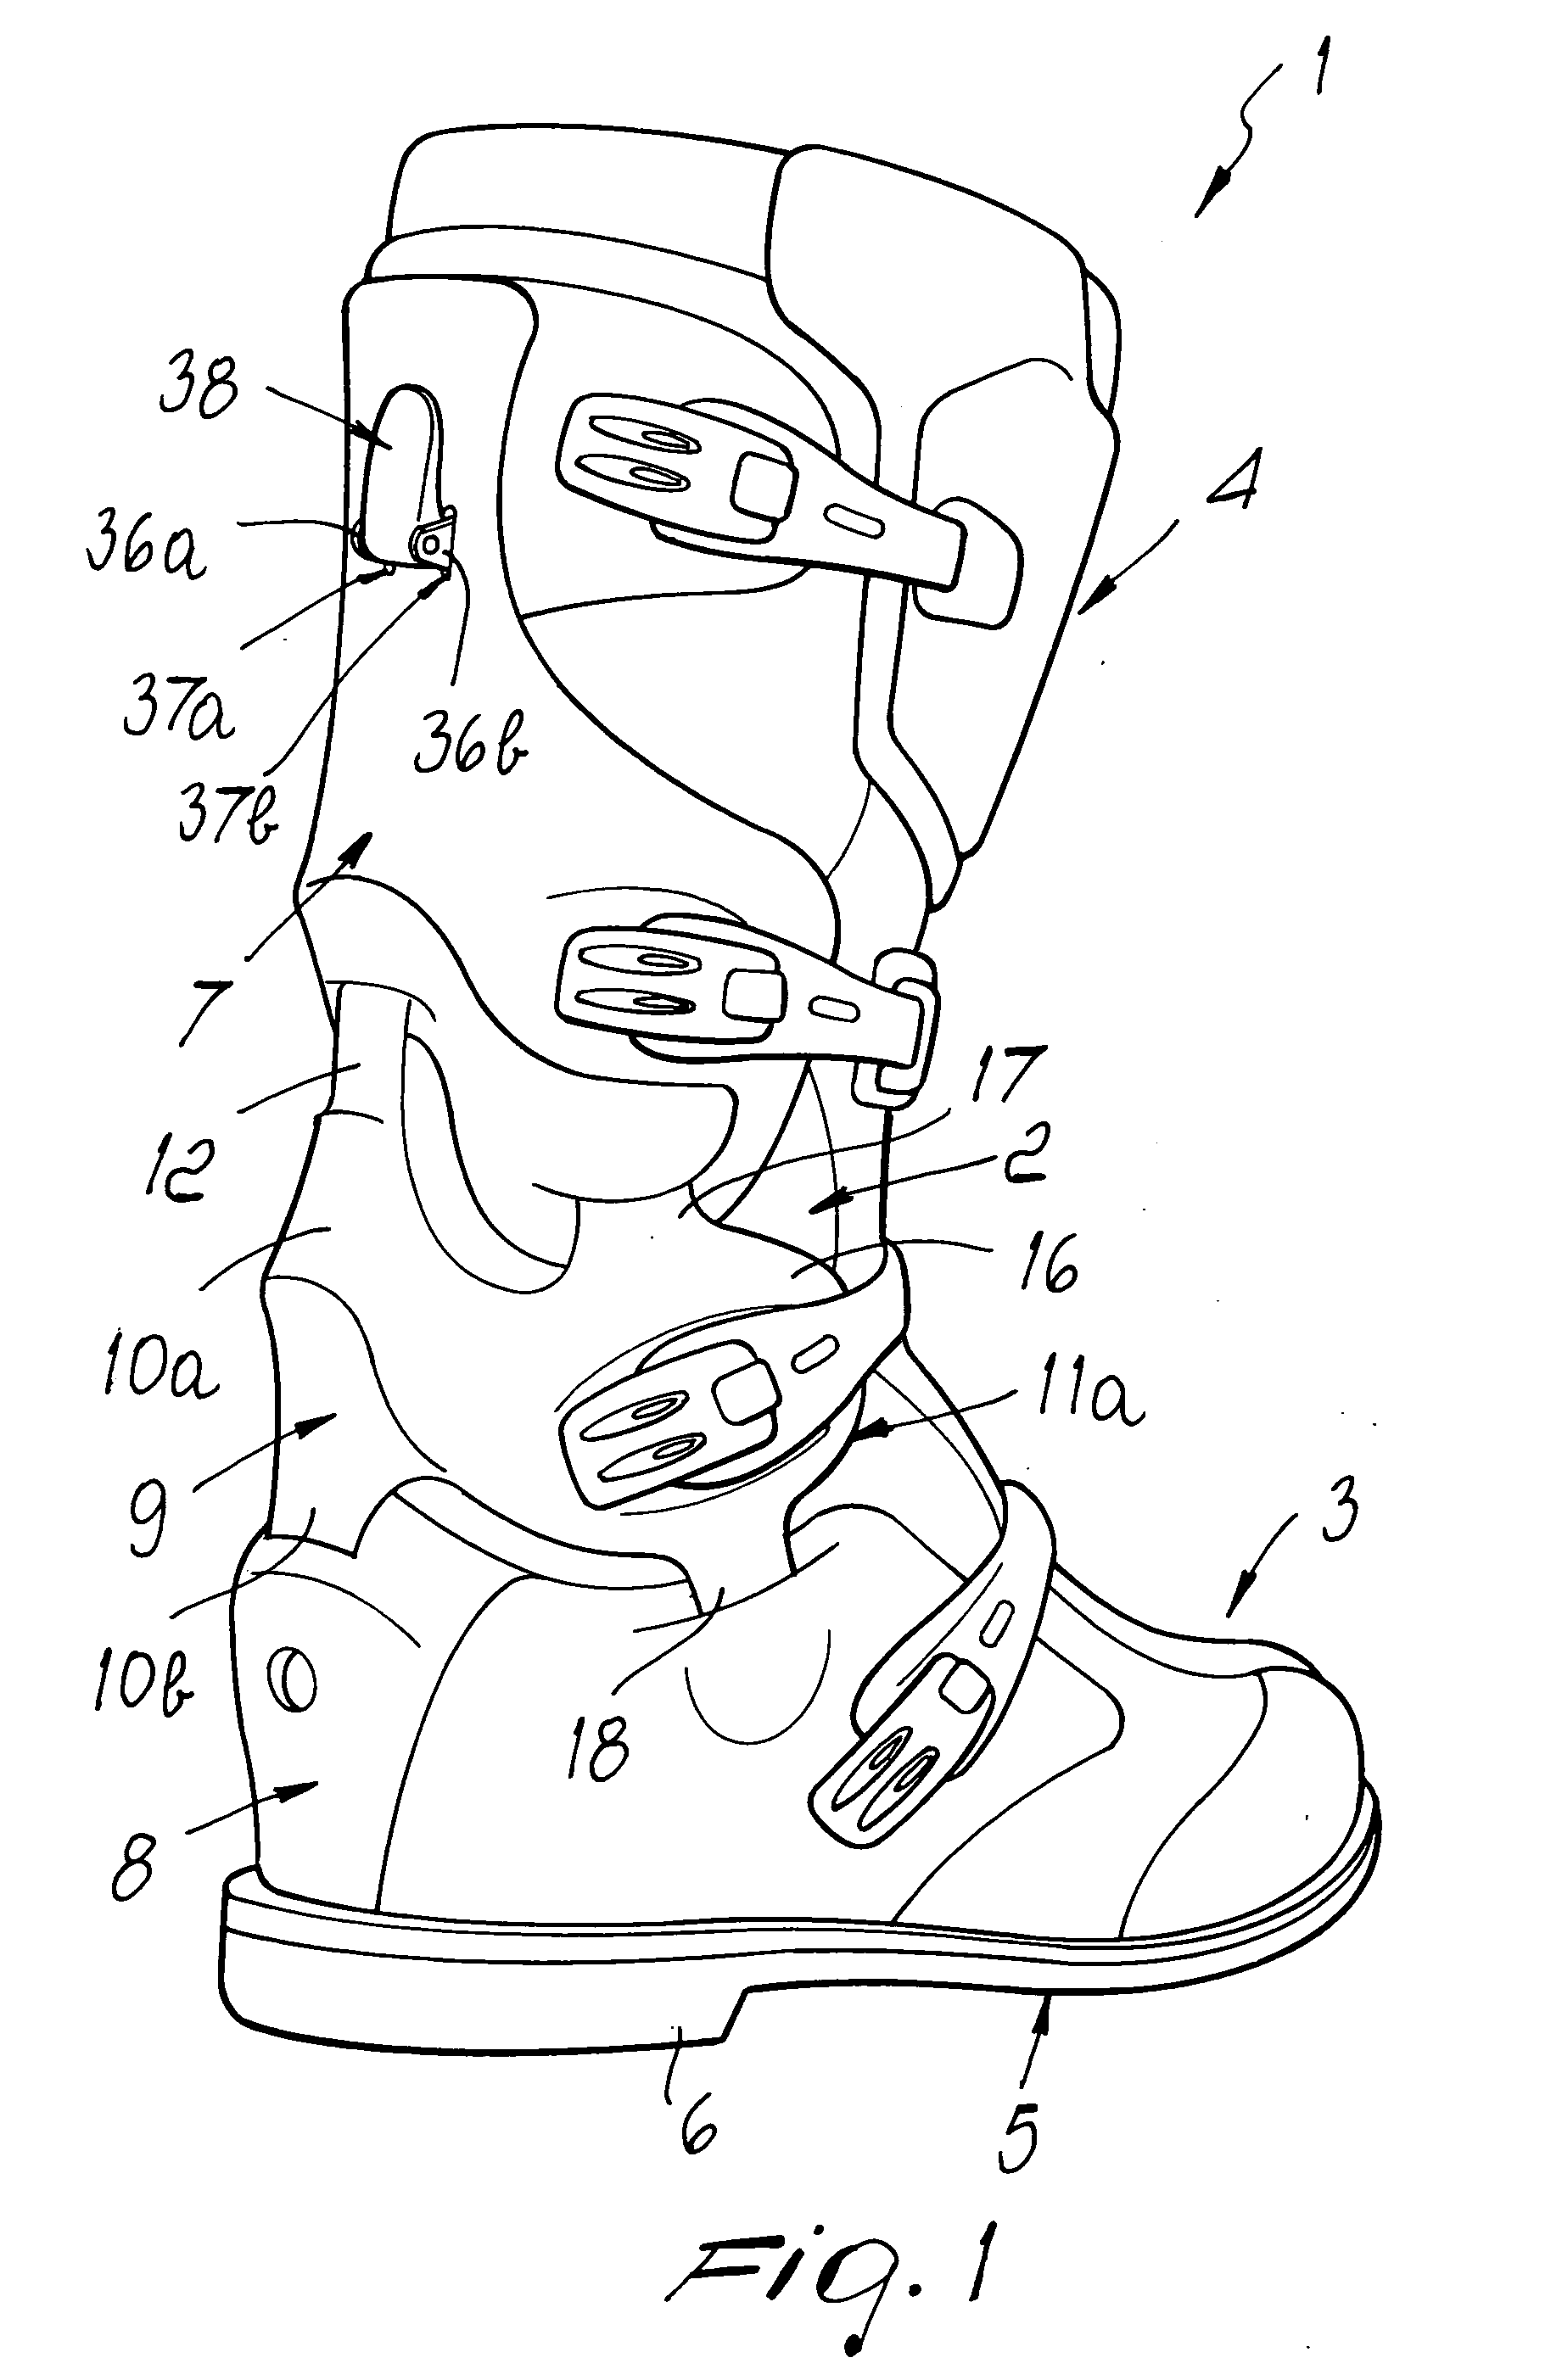 Flex control device particularly for a motocross boot